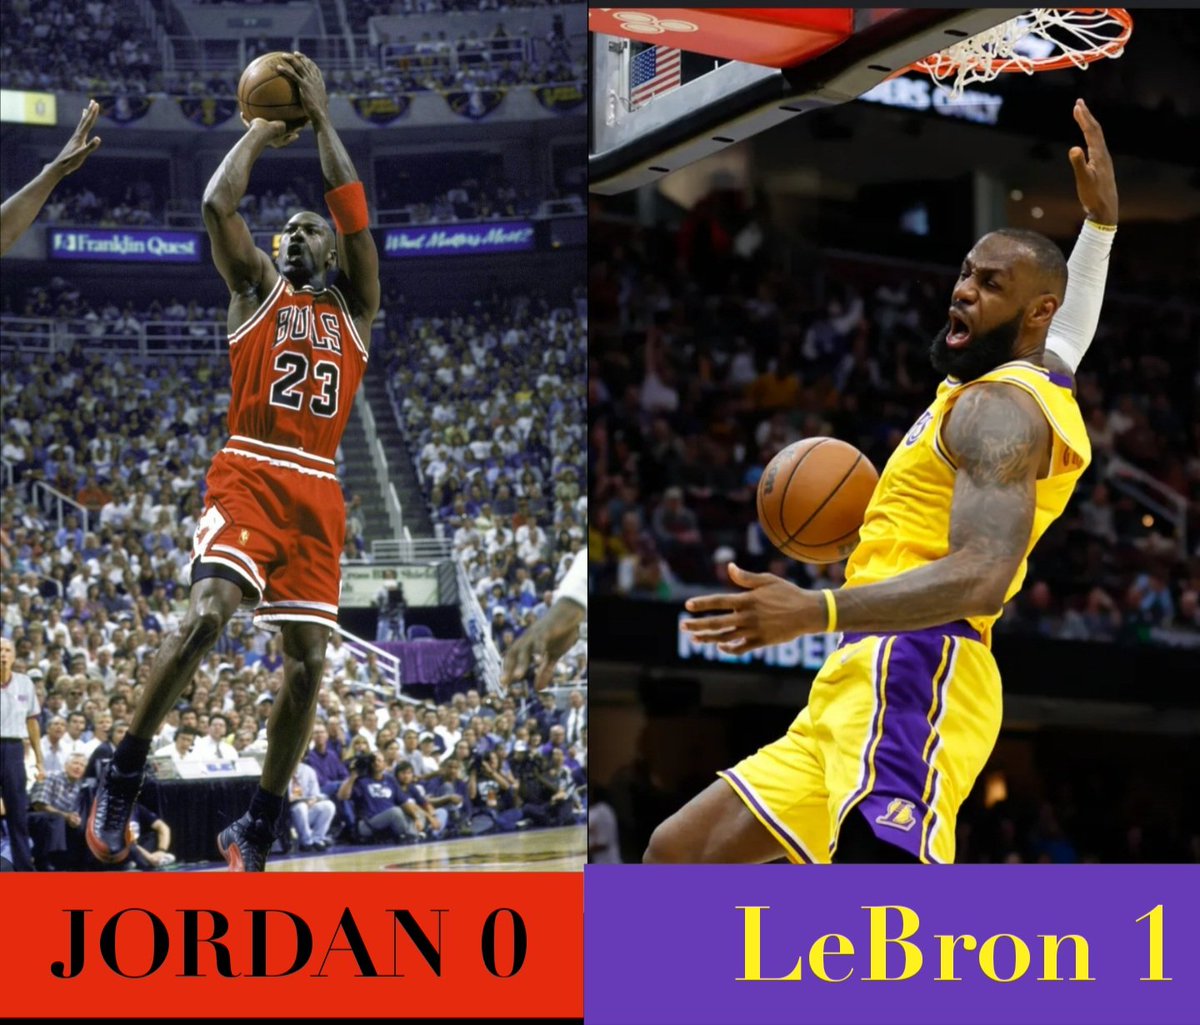 @LeBronJames surpasses @MJ23Facts in number of times swept in a Conference Finals!! #GoatStatus!!! Stop comparing him to the #Goat #Jordanallday!!